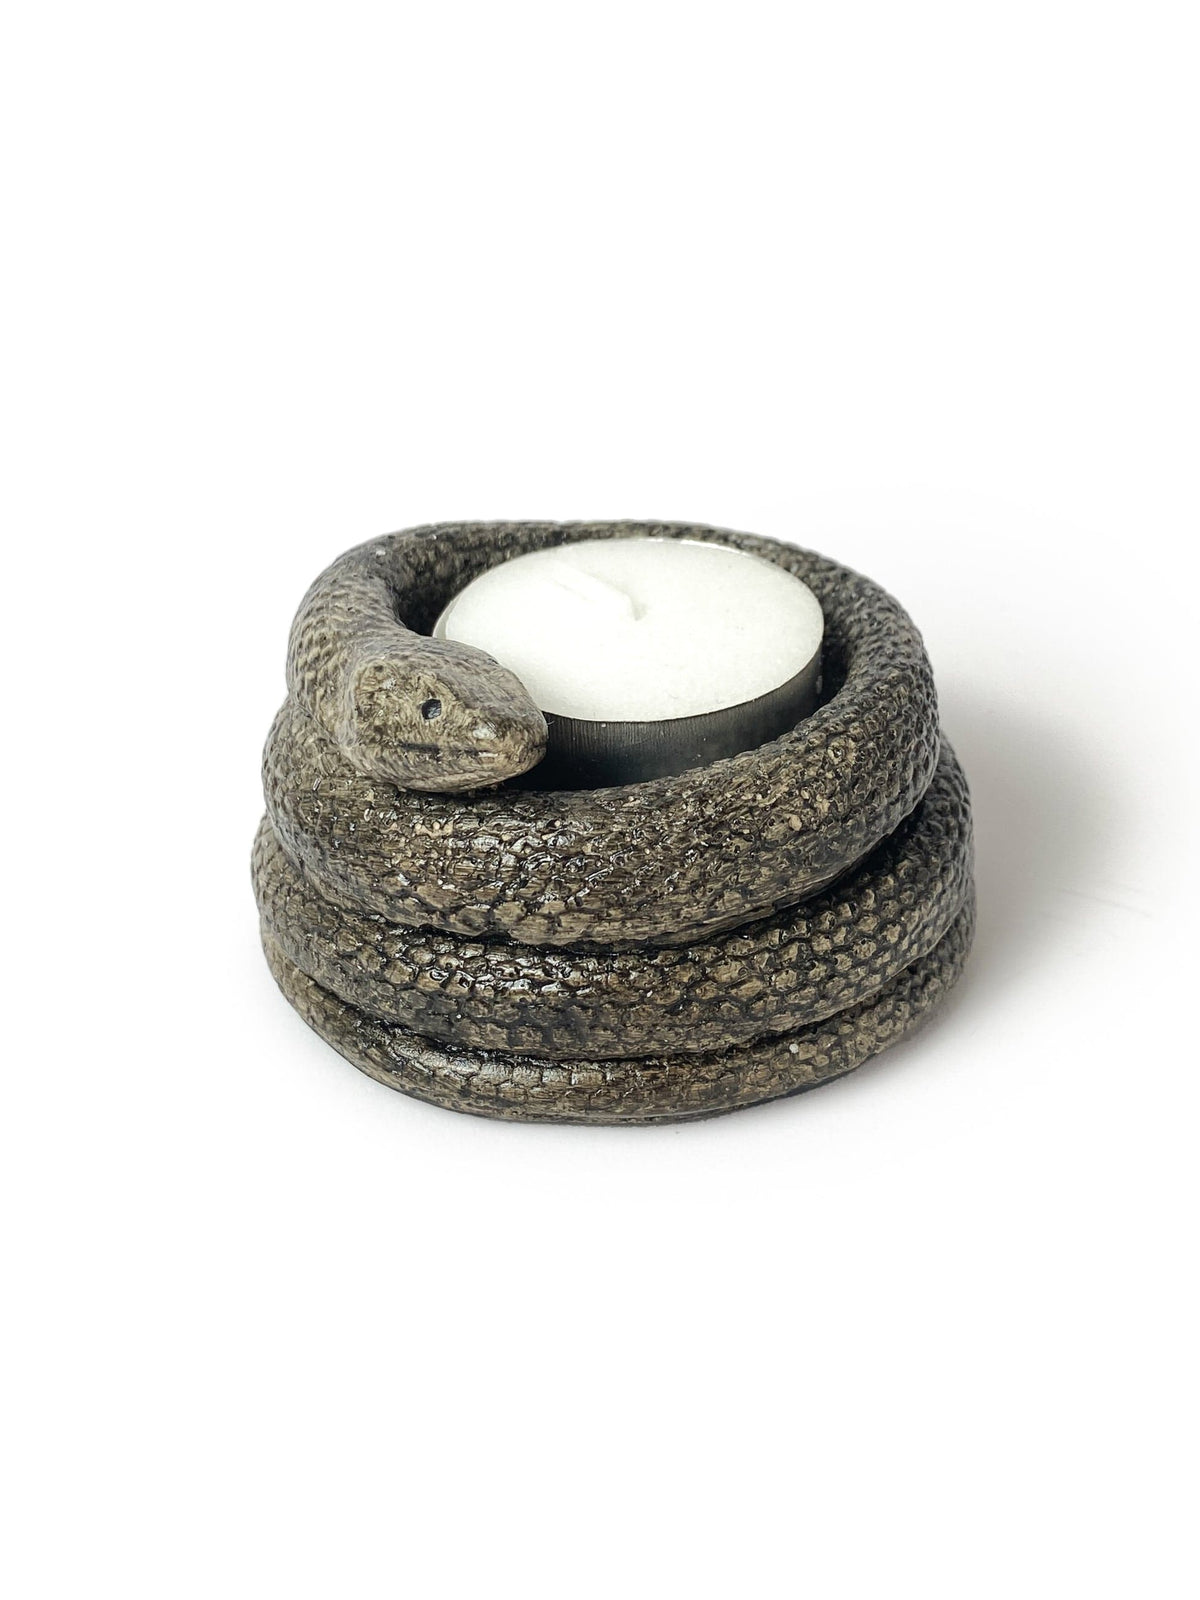 Moderniche Candle Holder Gray Concrete Snake Tealight Candle Holder